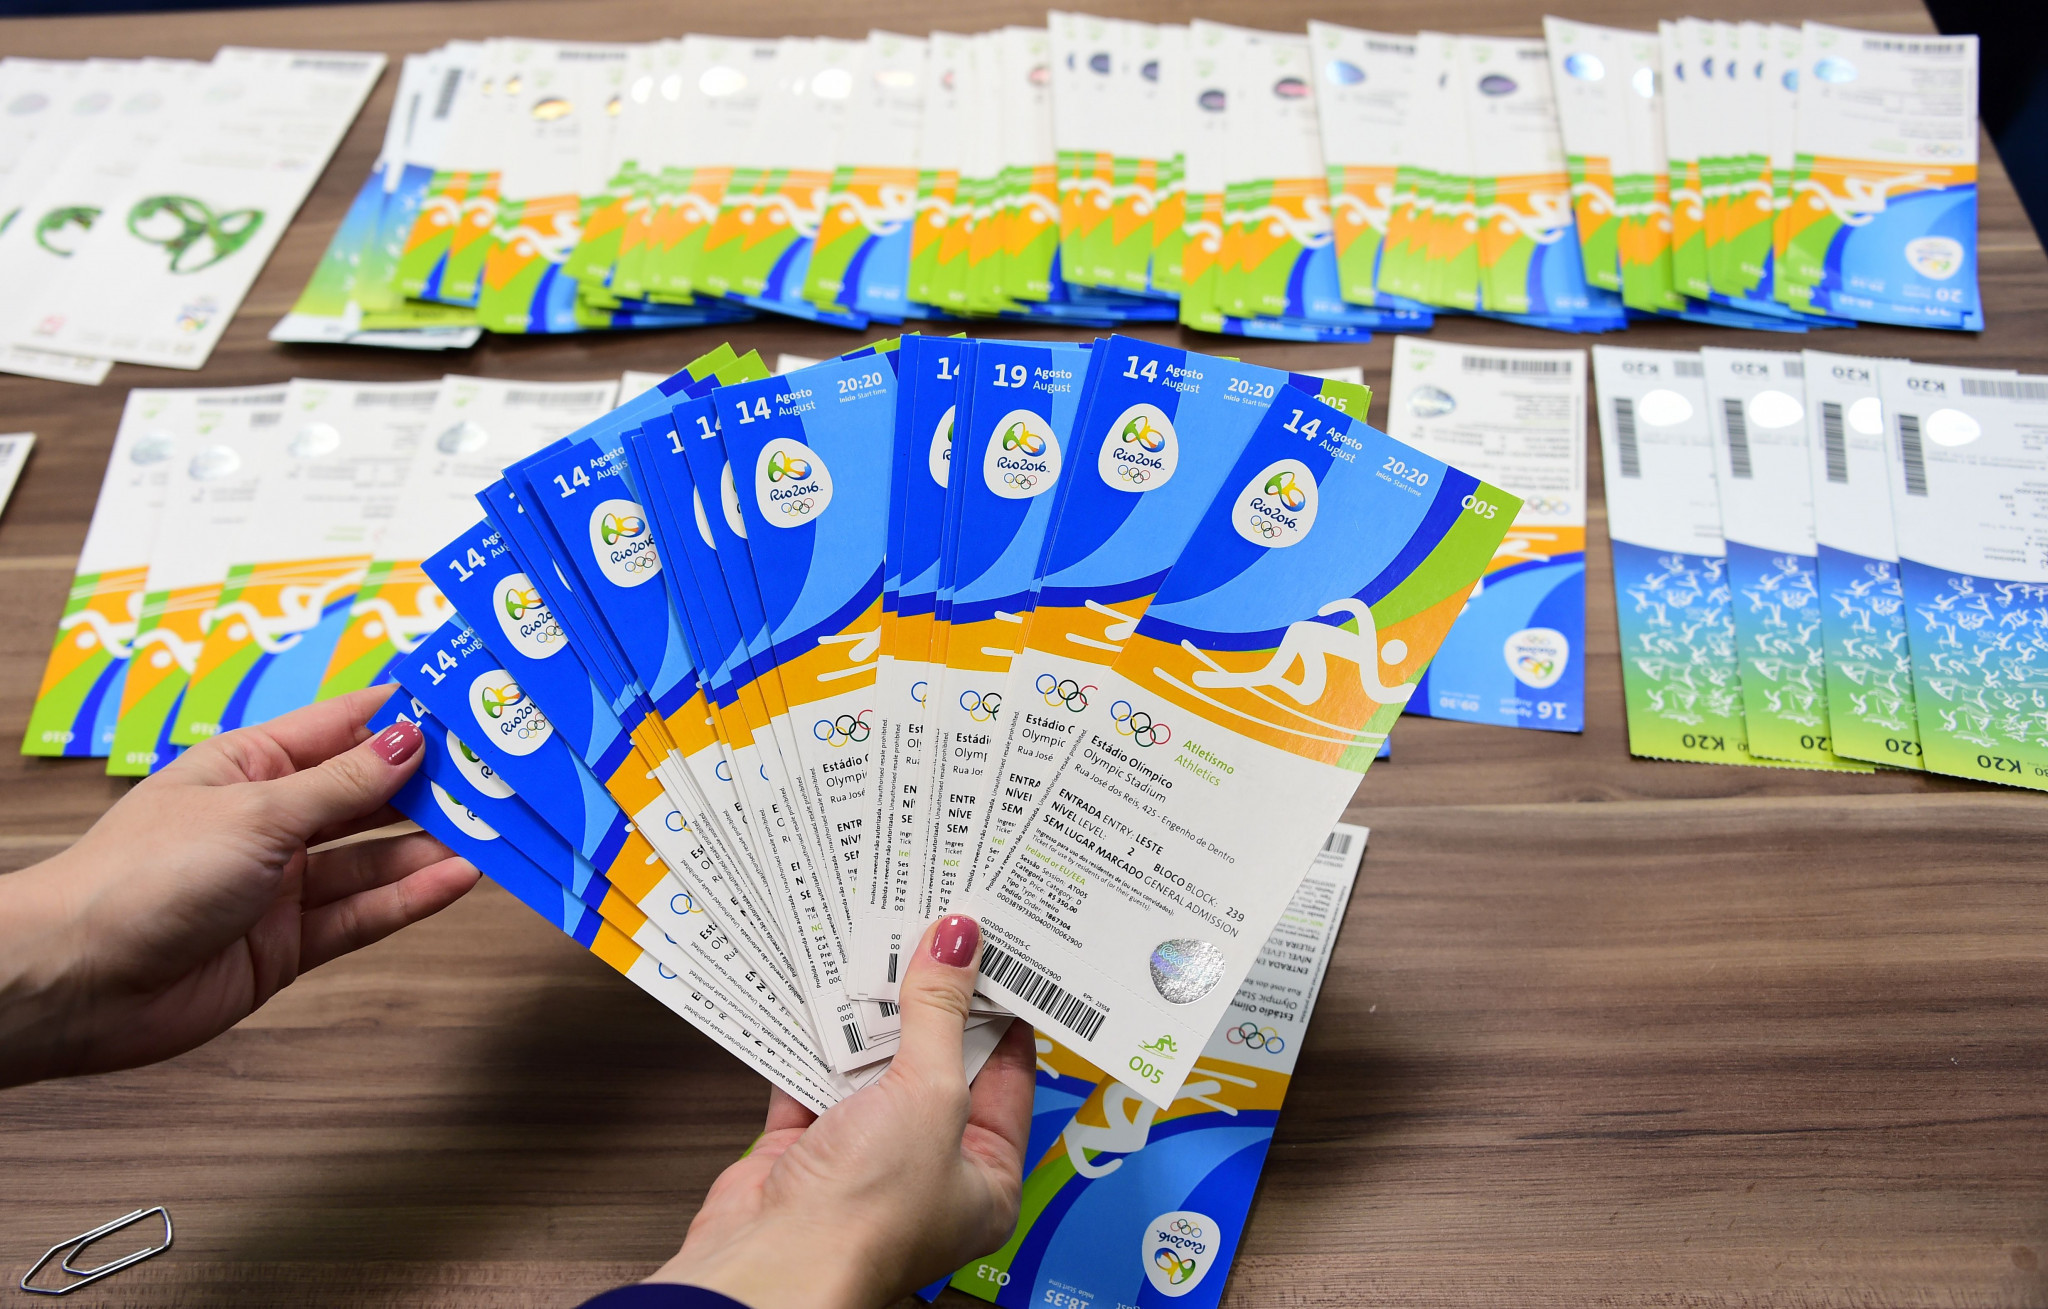 Brazilian police display seized tickets during Rio 2016 ©Getty Images